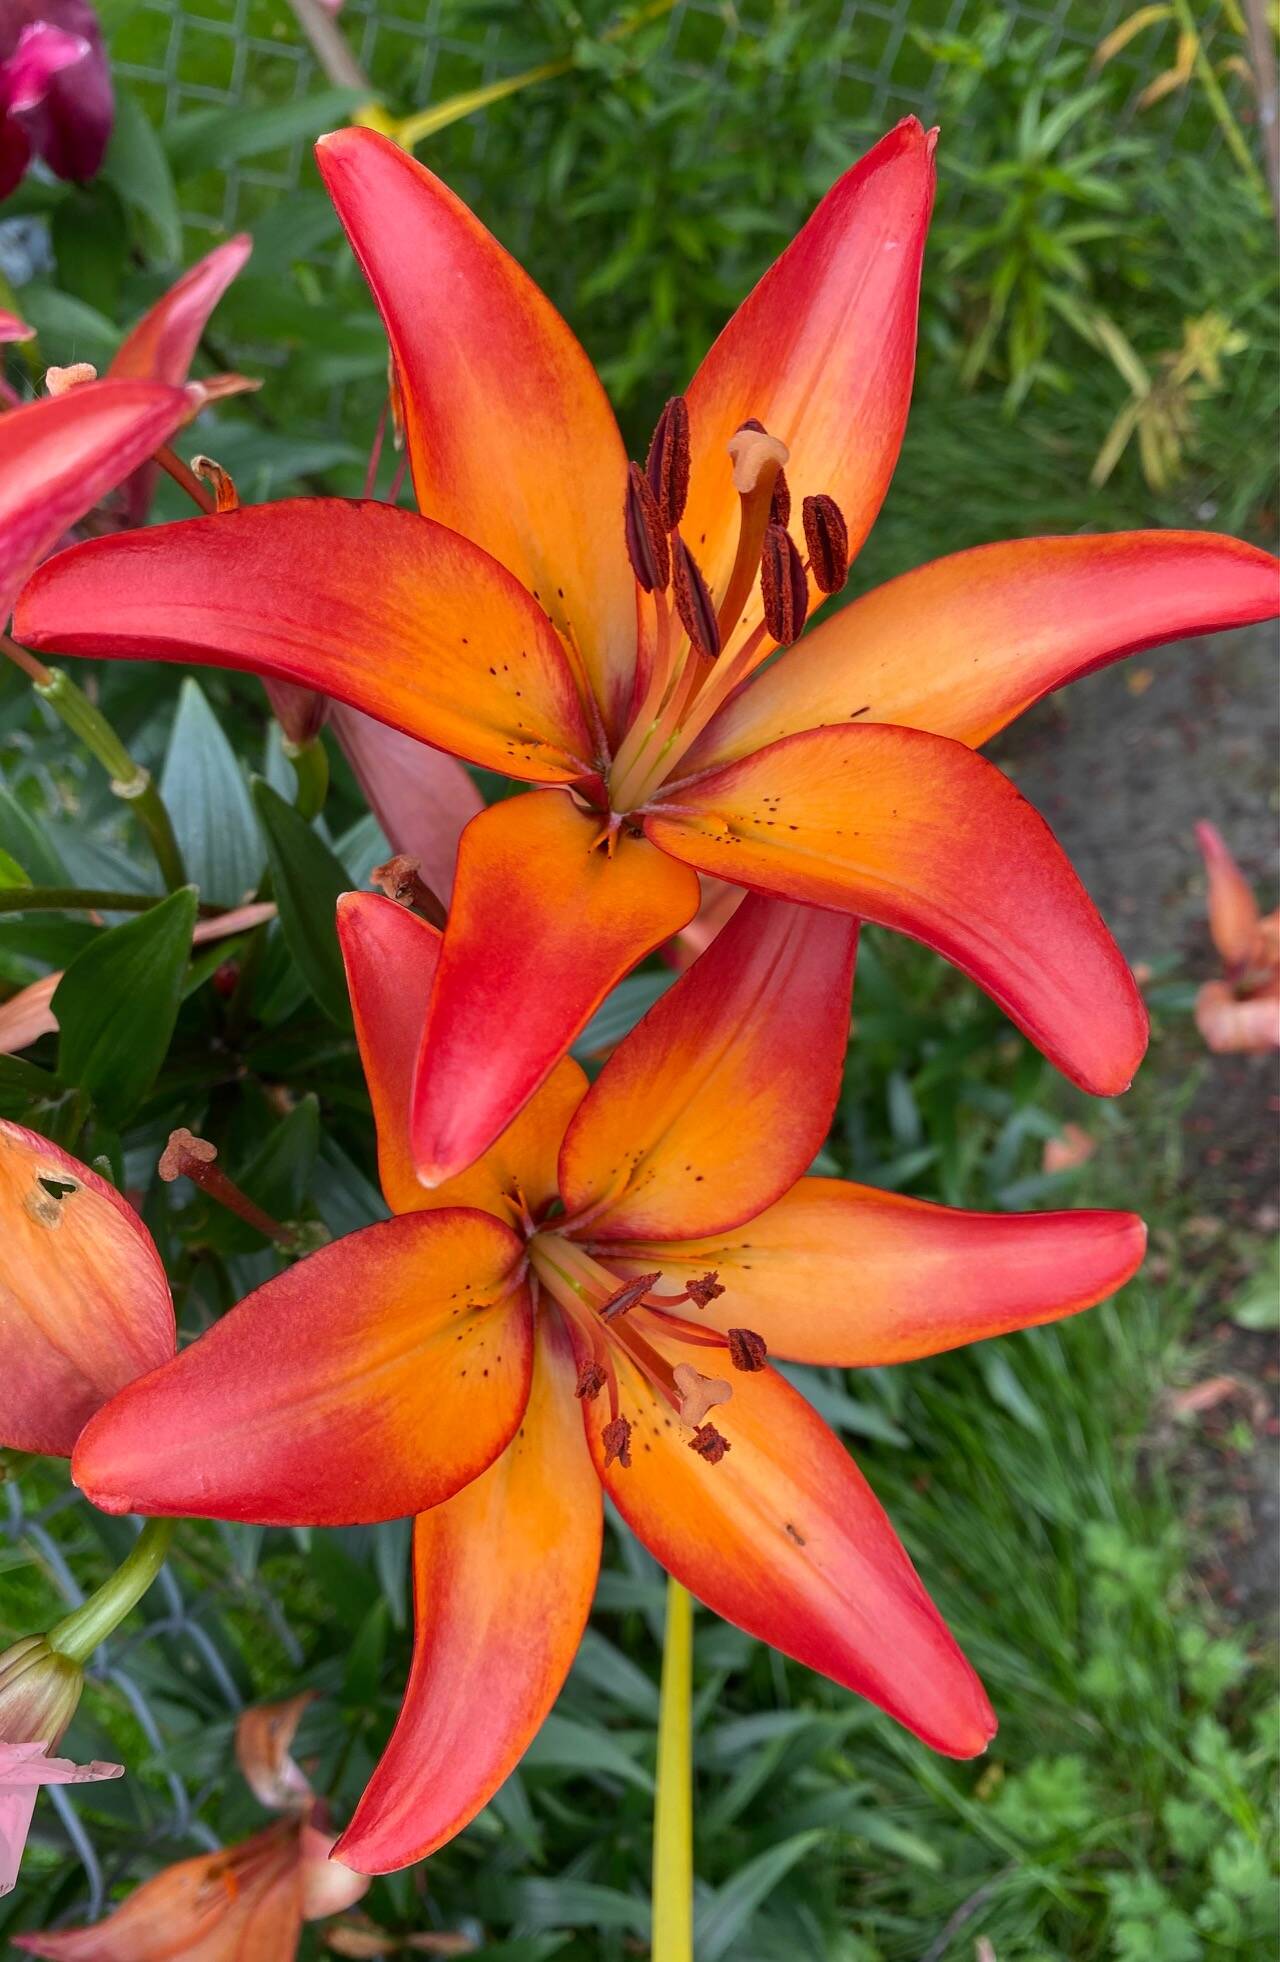 Asiatic lilies spotted in the downtown highlands on Aug. 21, 2022. (Courtesy Photo / Denise Carroll)